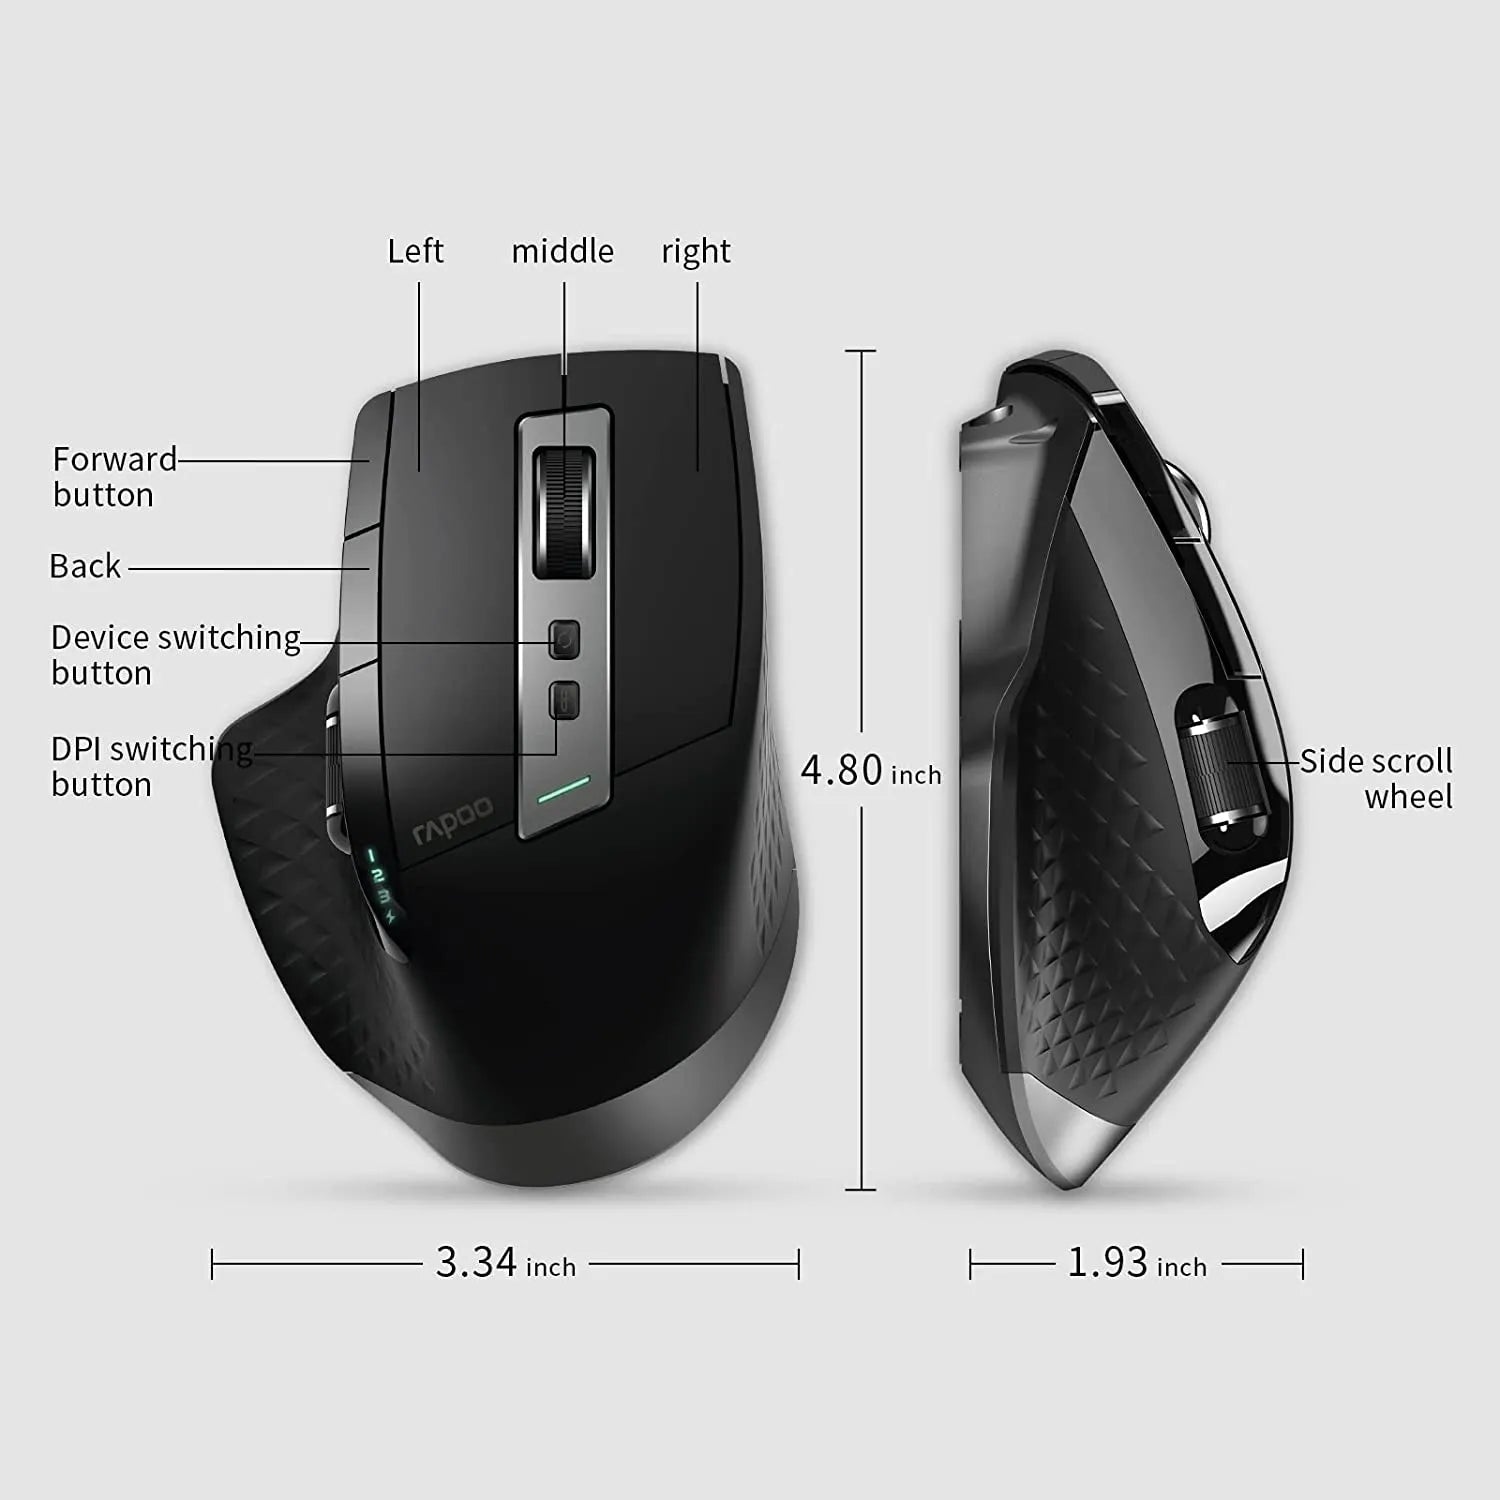 Mouse wireless ricaricabile a LED con ricevitore USB, mouse